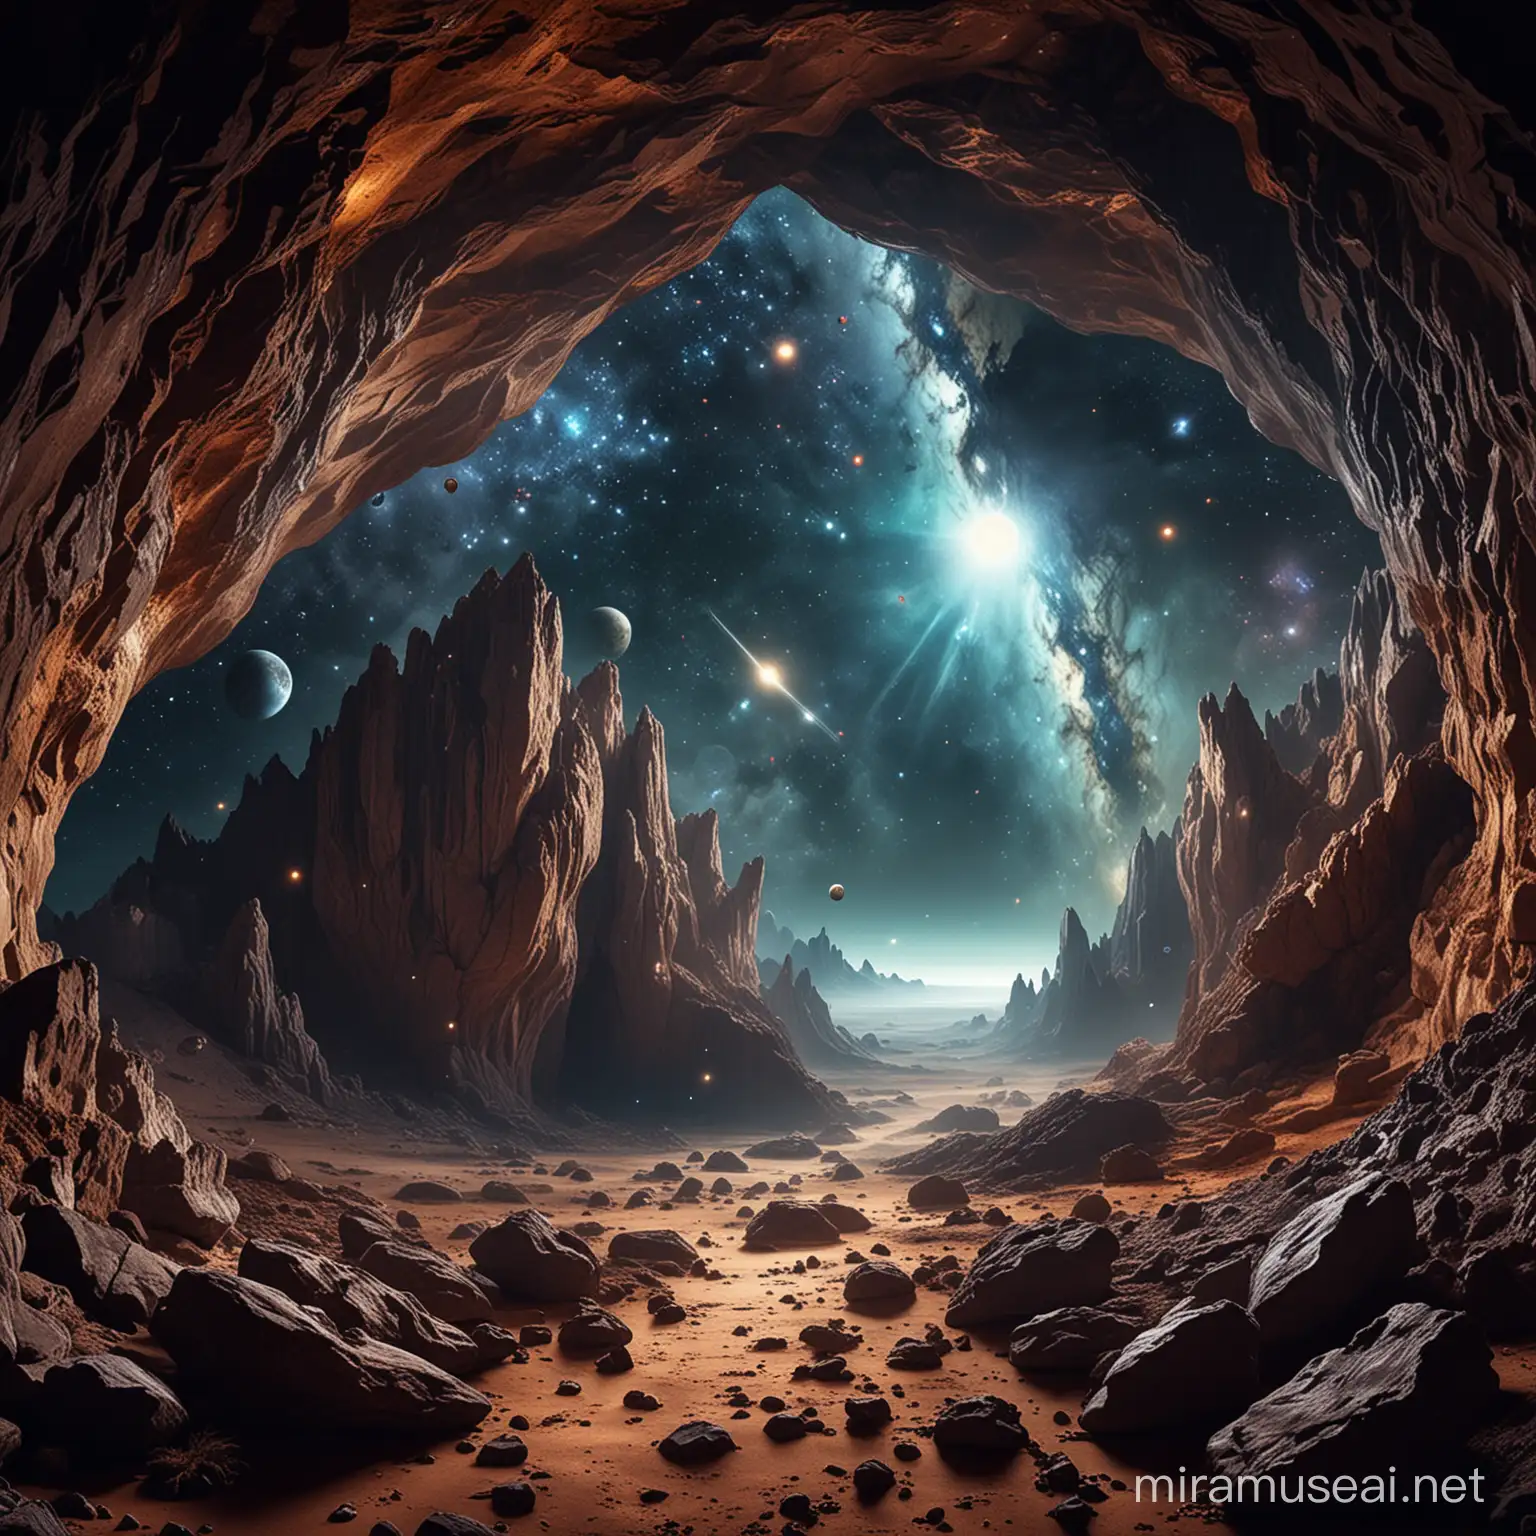 A cave that opens into outer space, planets in view, with wildlife in space